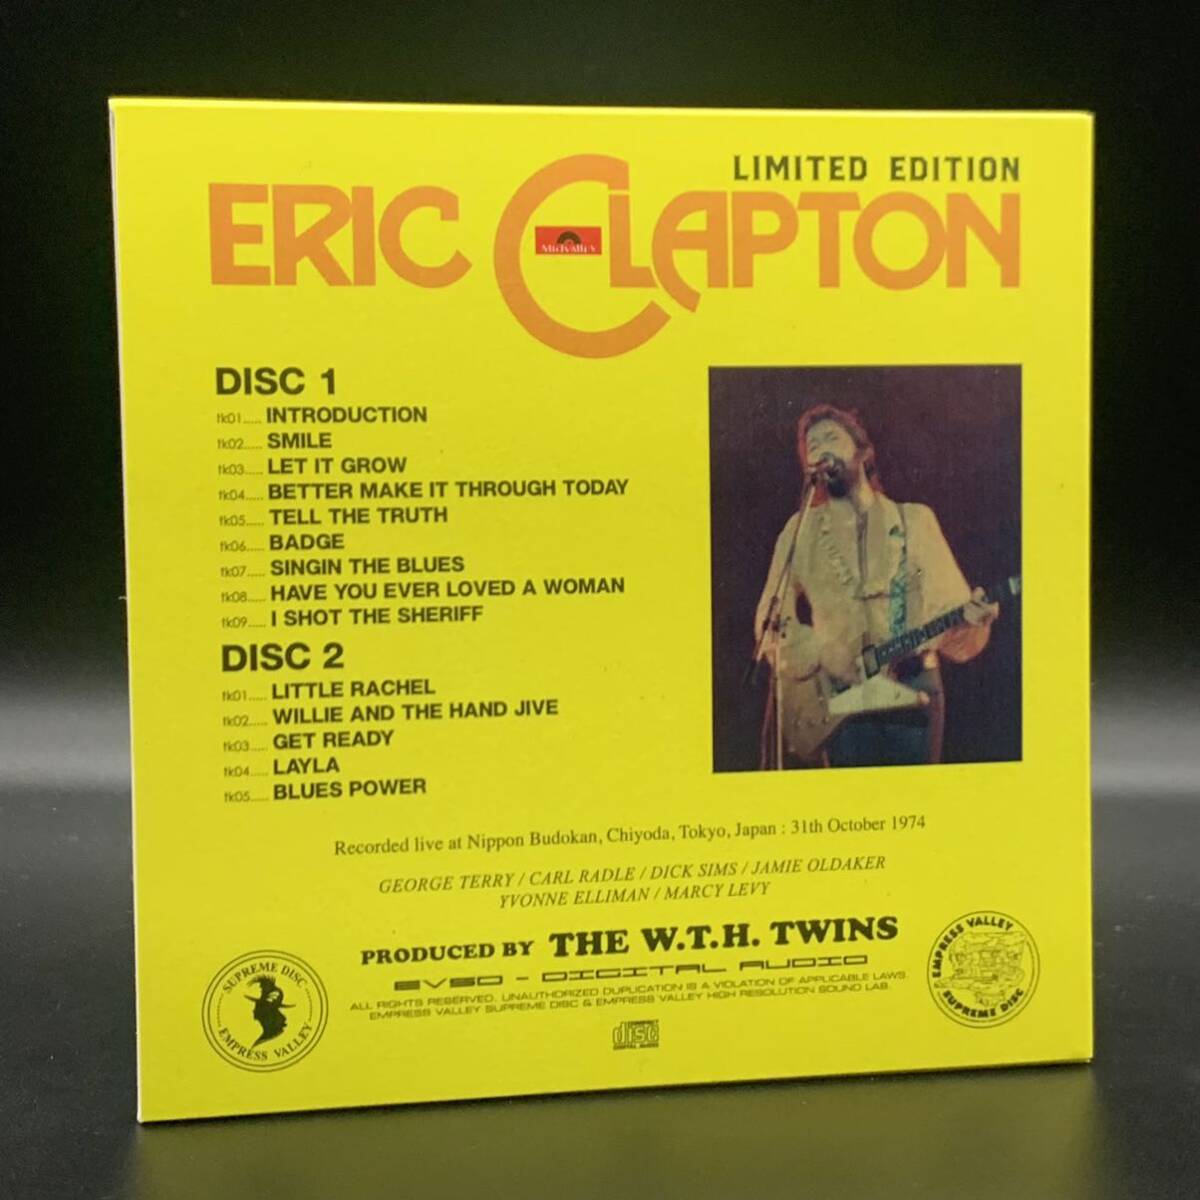 ERIC CLAPTON / TROPICAL SOUND SHOWER「亜熱帯武道館」(6CD BOX with Booklet) 初来日武道館3公演を全て初登場音源で収録した凄いやつ！